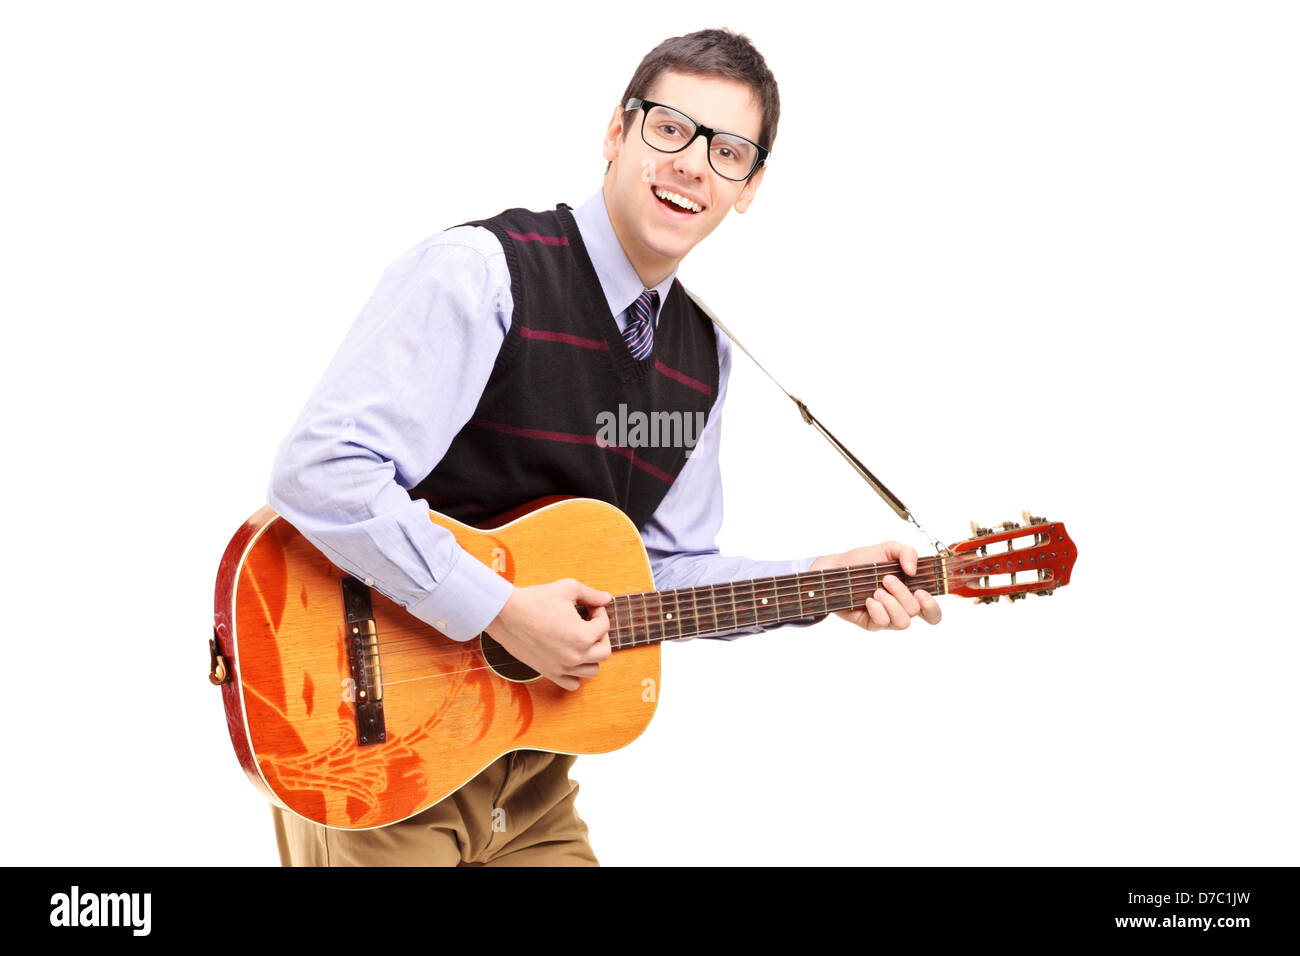 A young male playing a guitar isolated against white background Stock Photo